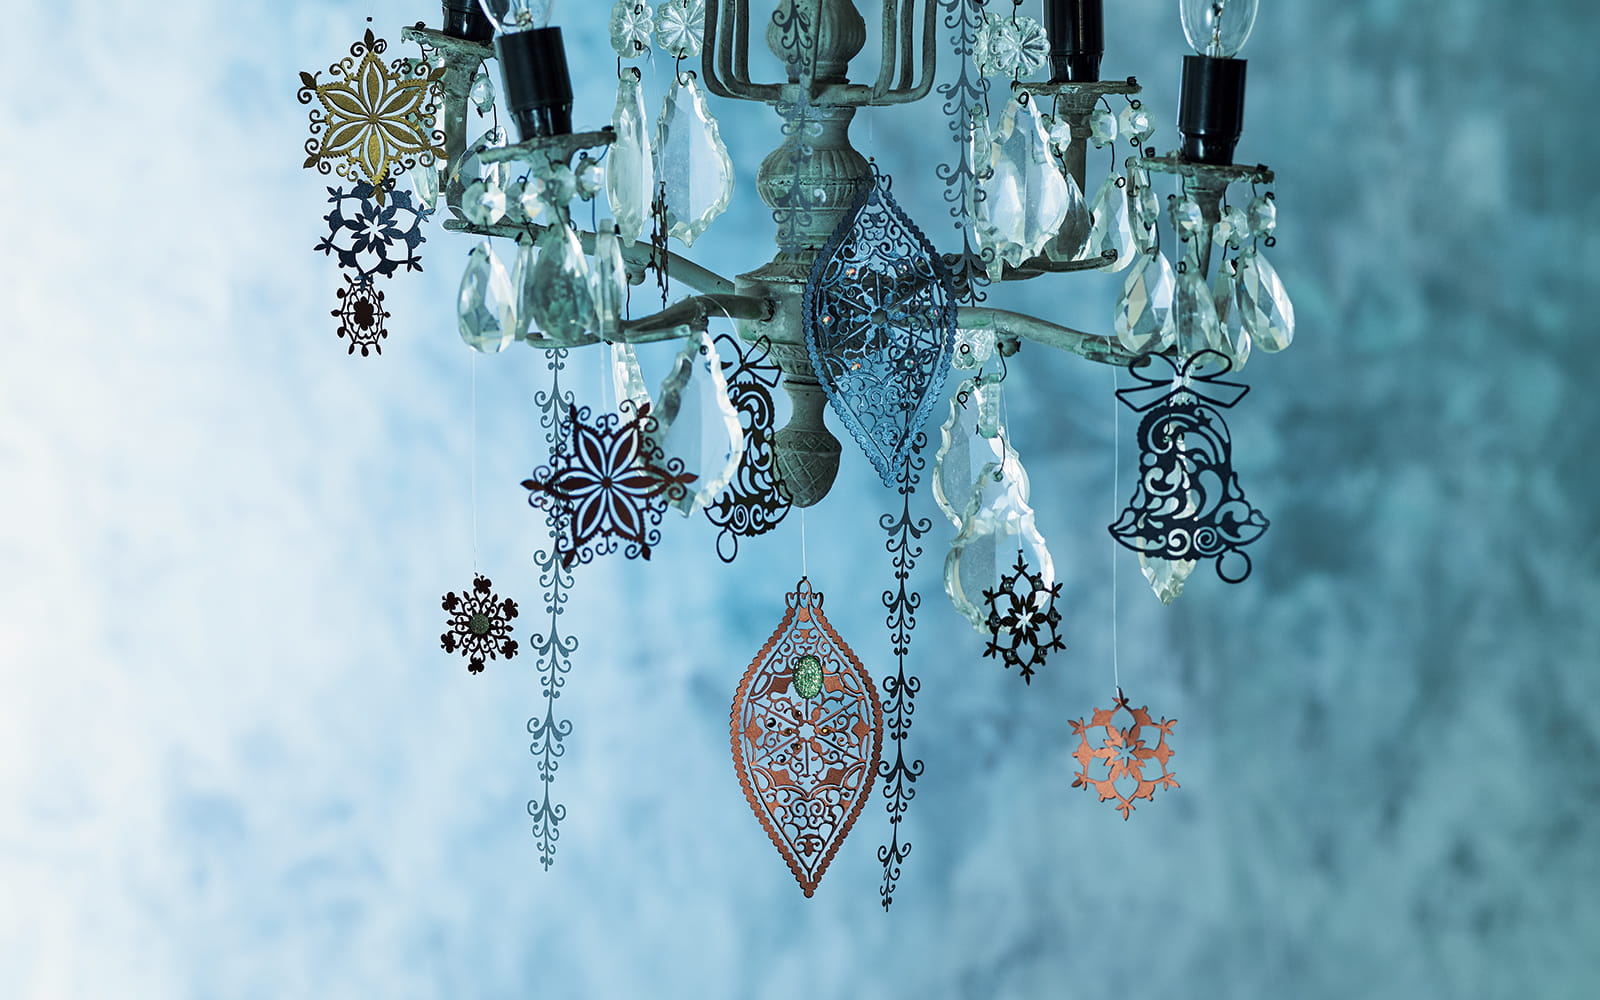 Chandelier with intricate tattered lace designs on blue background